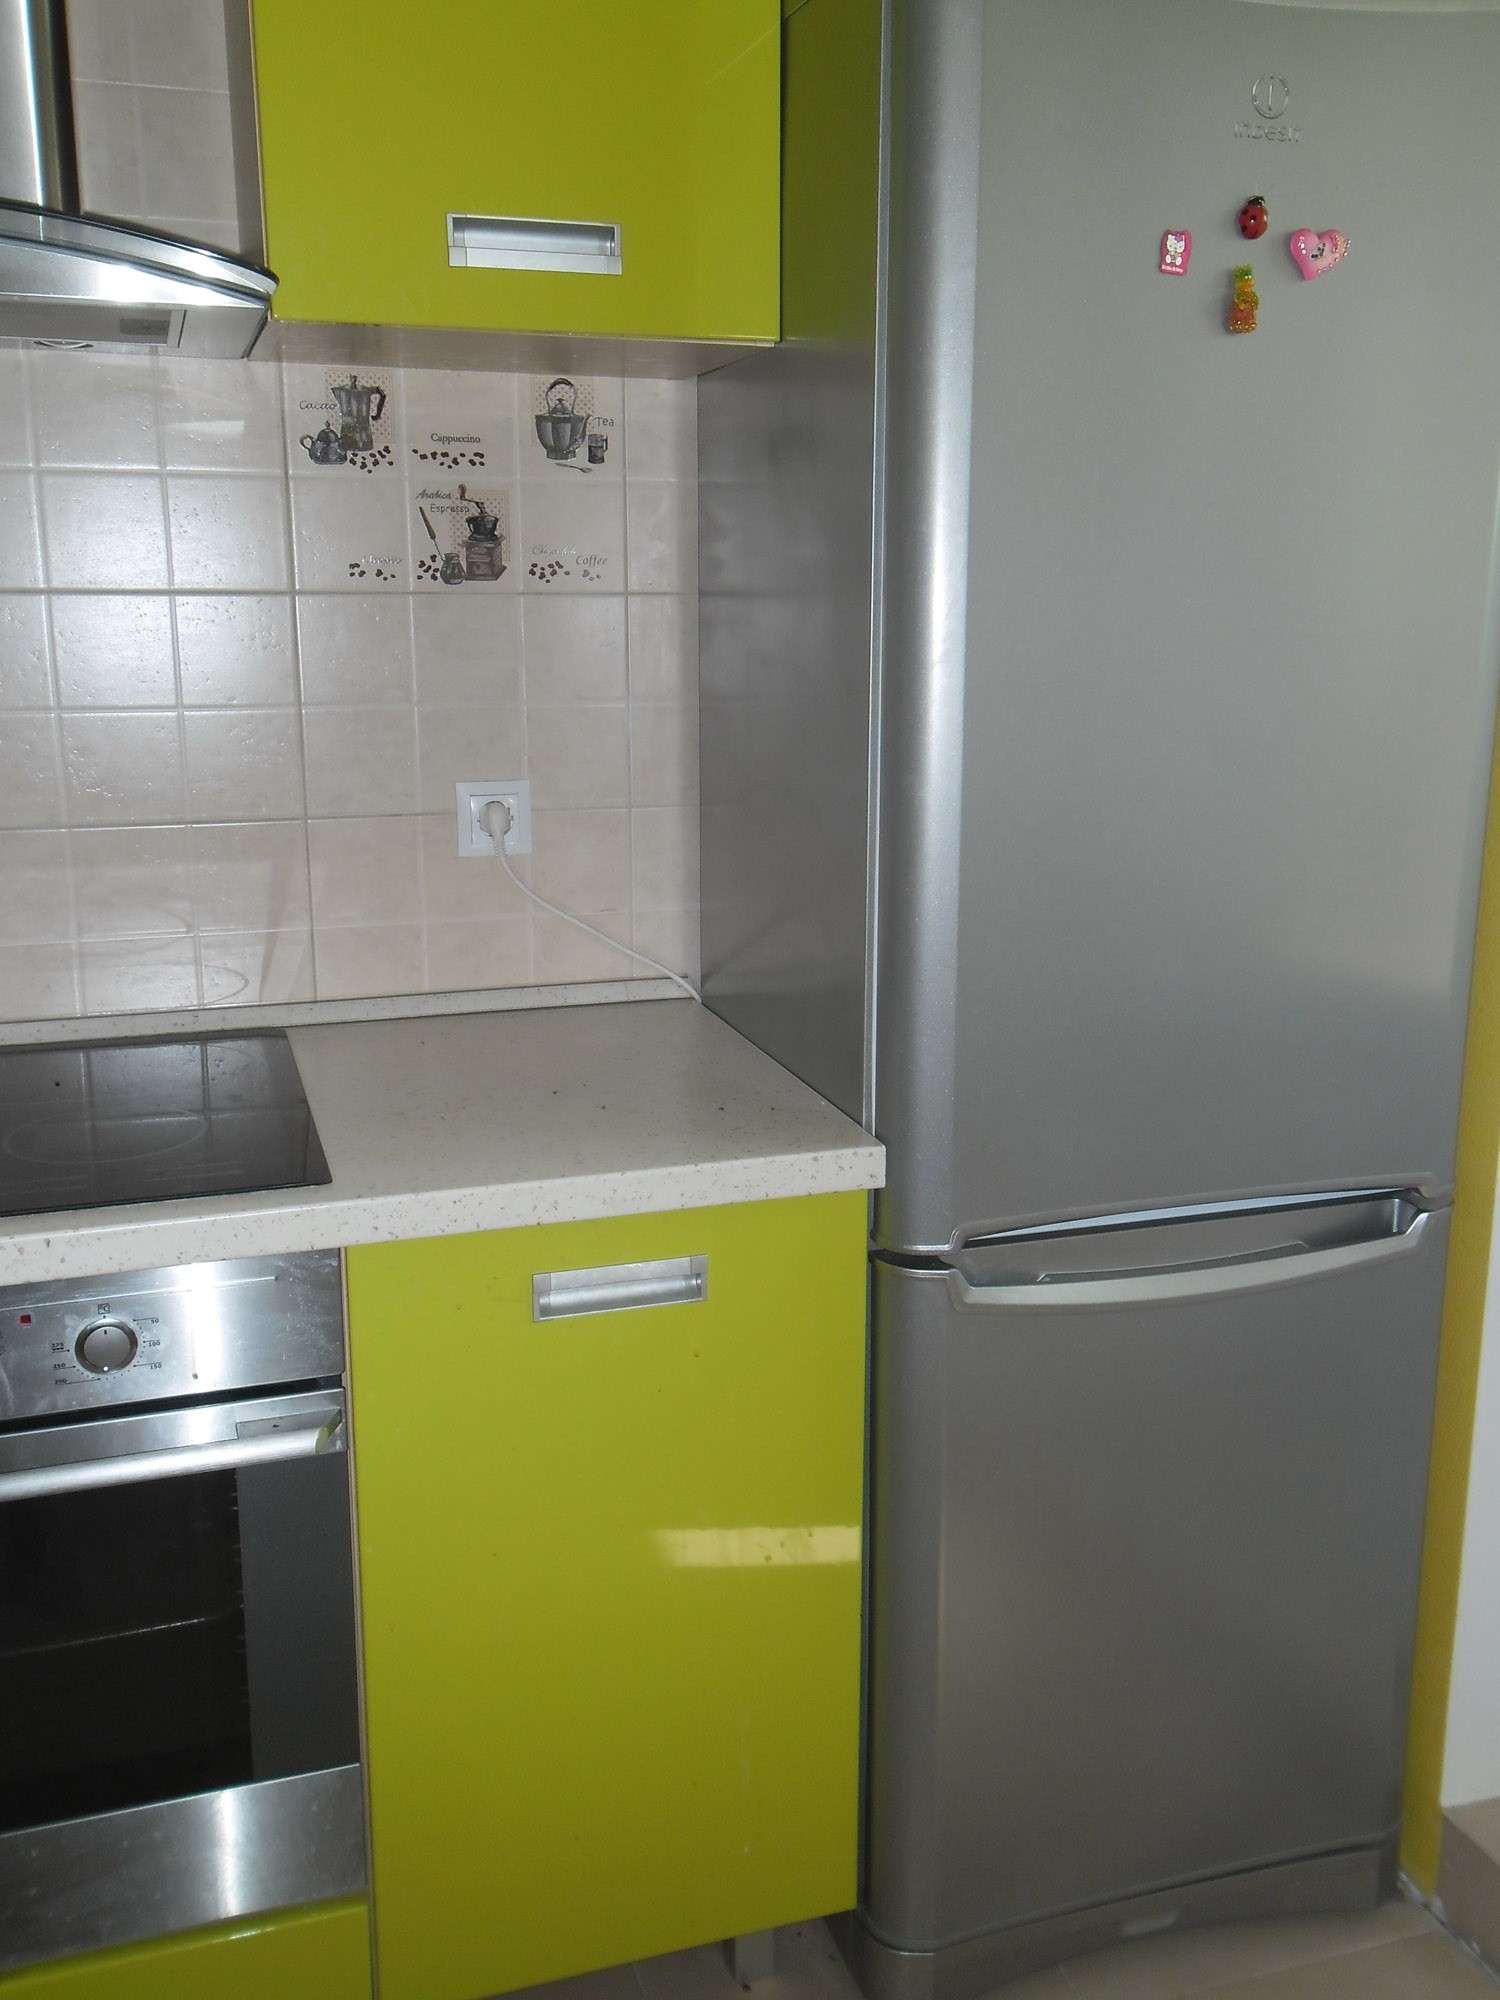 a large refrigerator in the facade of the kitchen in multi-colored